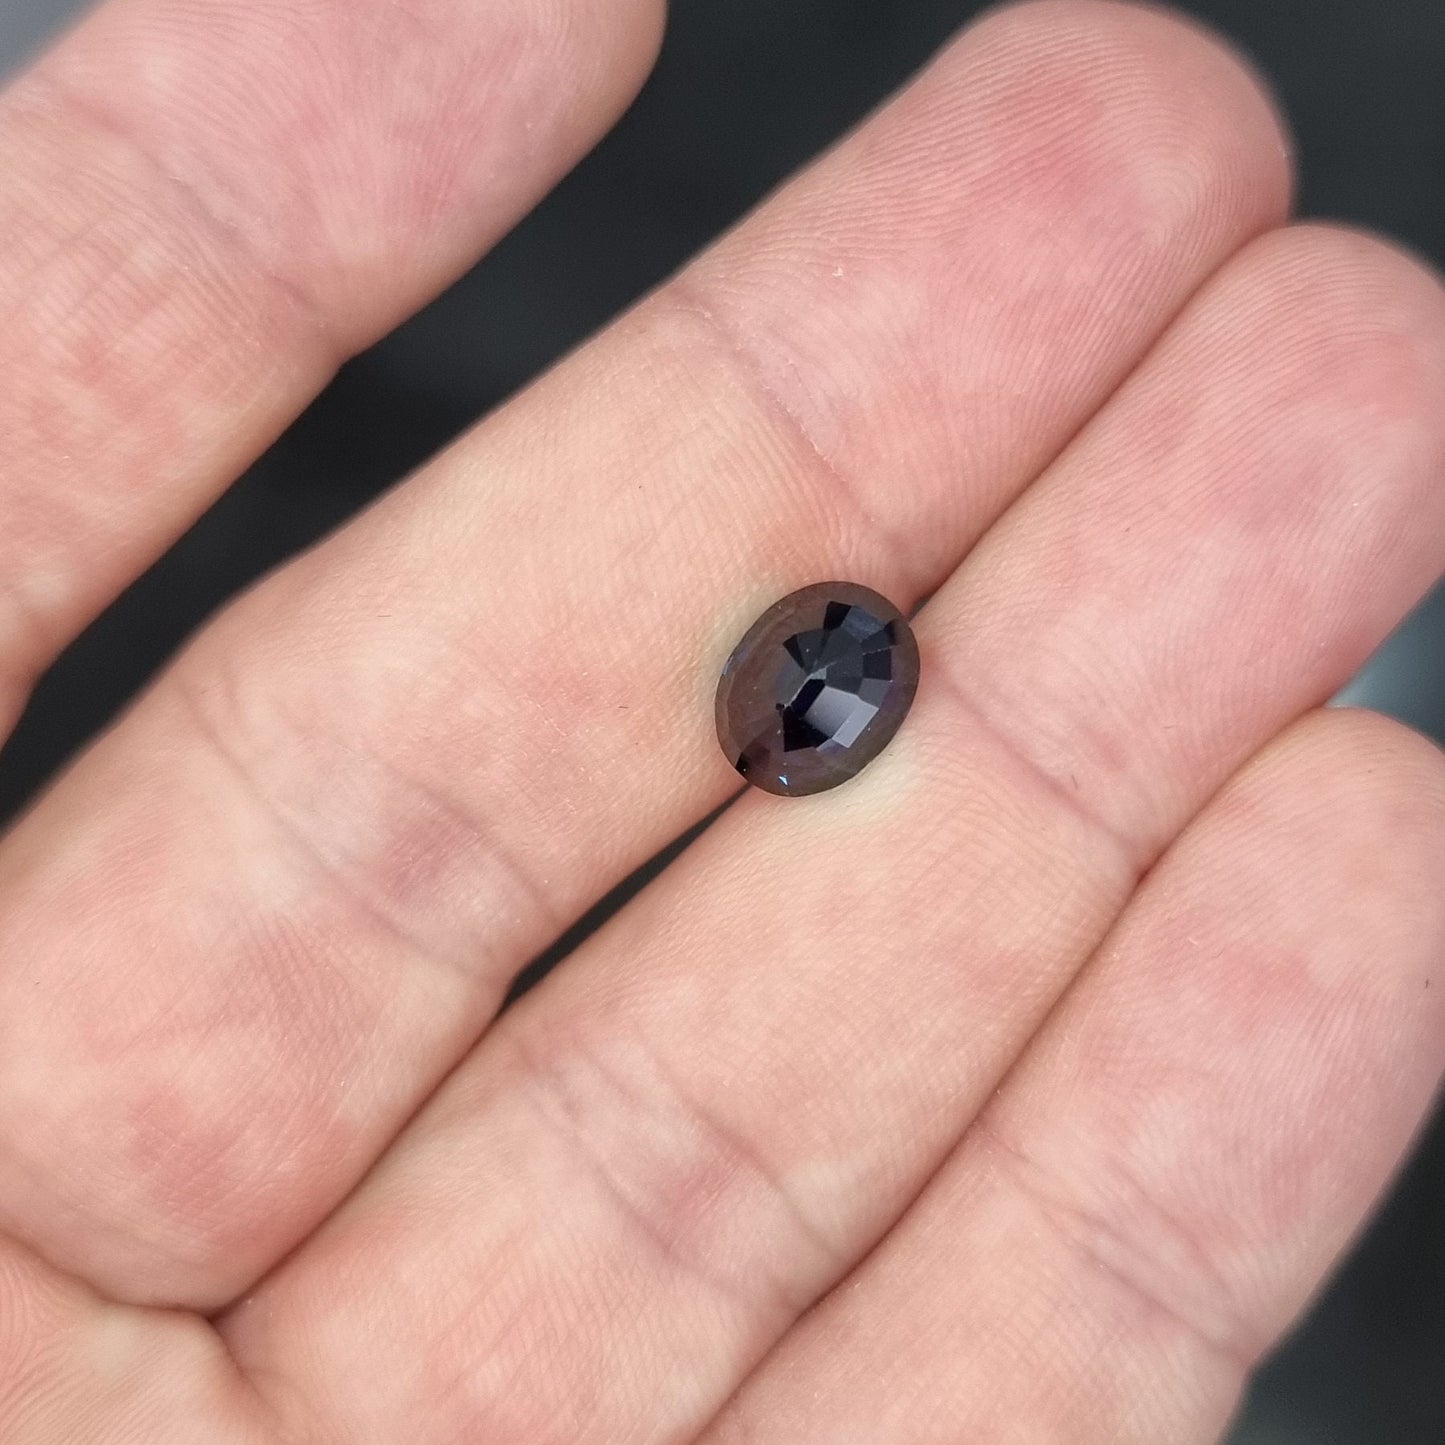 Royal Blue Pearshape Ceylon Sapphire with GFCO Certificate 4.17 CTS